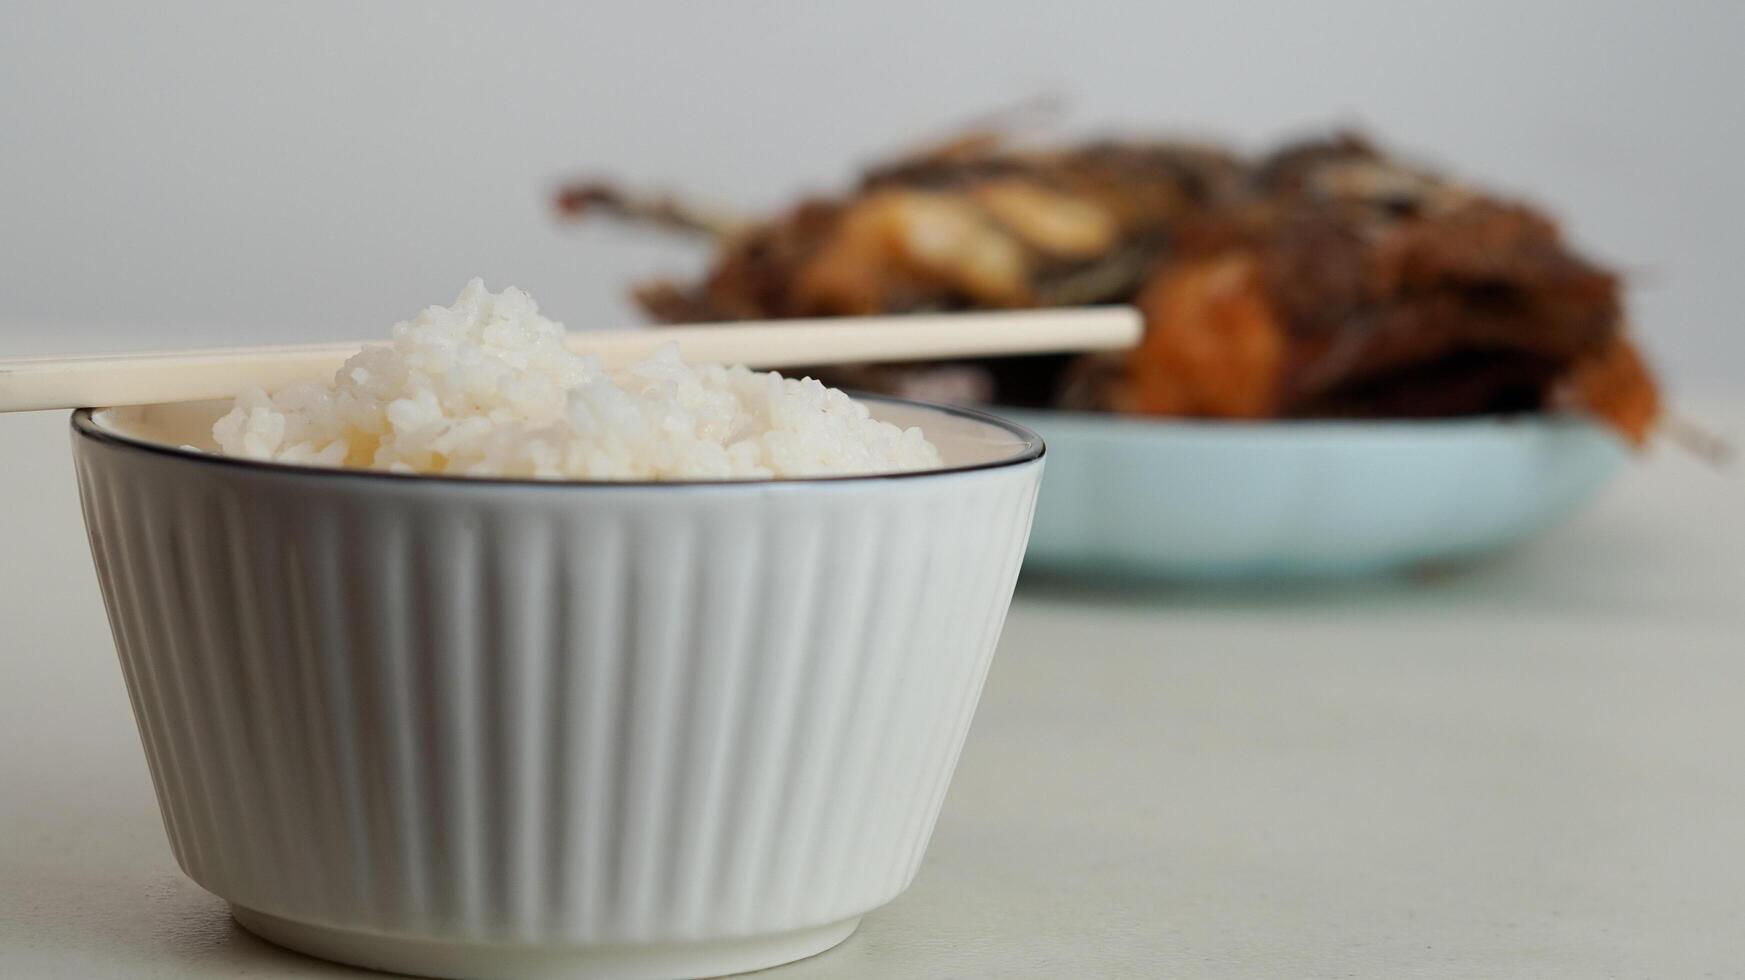 White rice in a bowl and fried fish on a white plate are served on the table photo